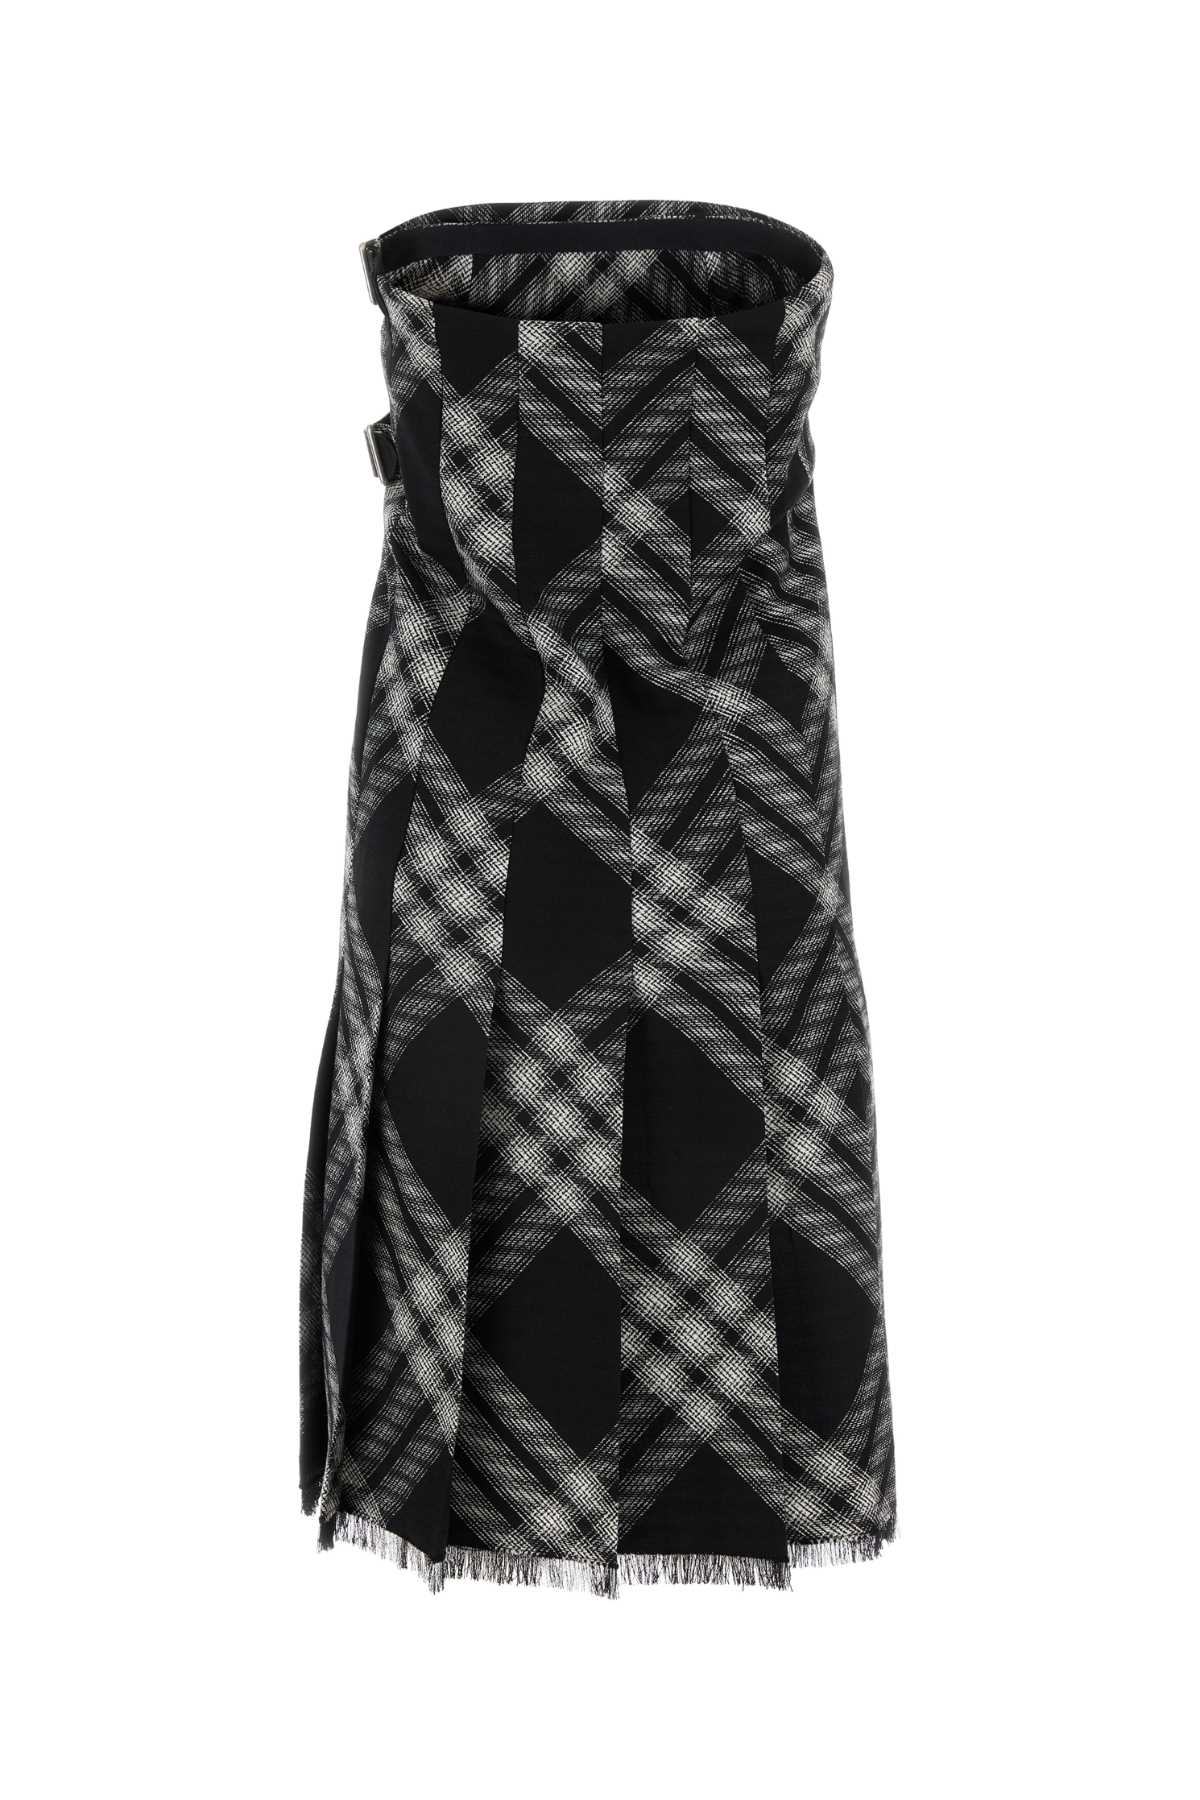 Burberry Embroidered Wool Dress In Monochrome